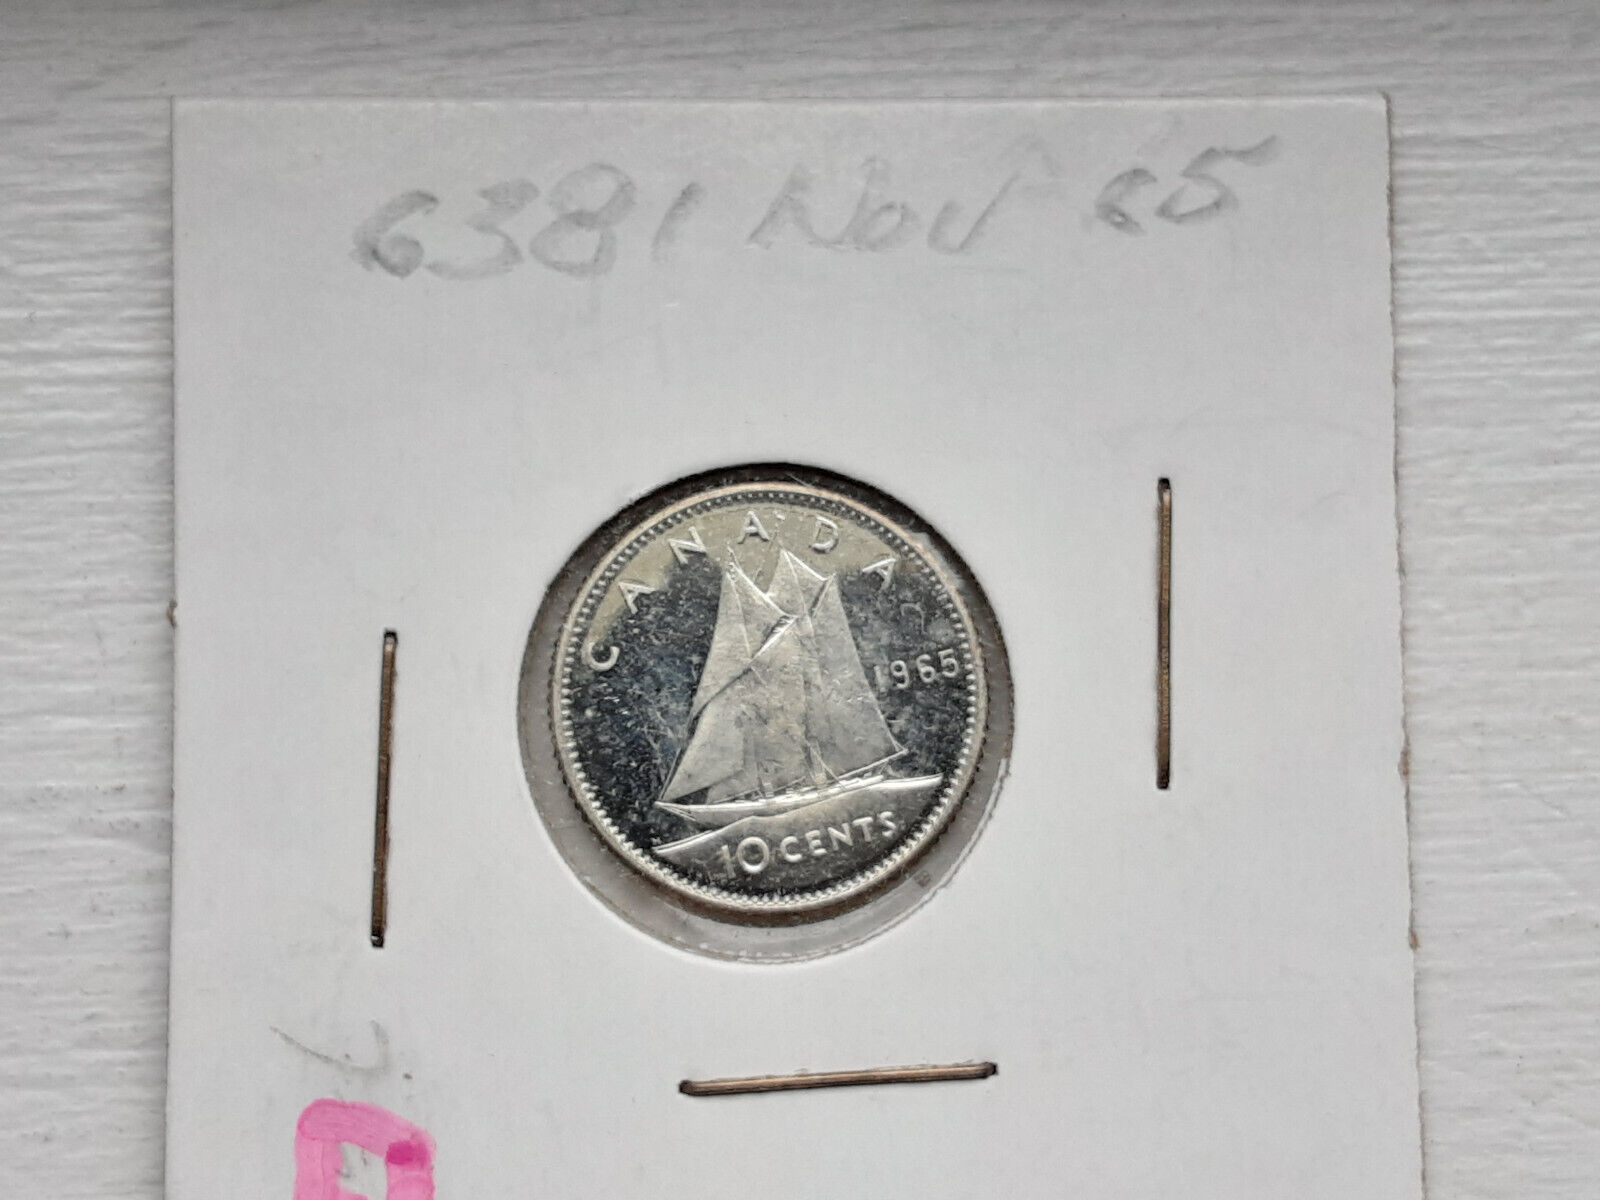 1965 Canadian Silver Dime - Canada 10 Cent a beauty